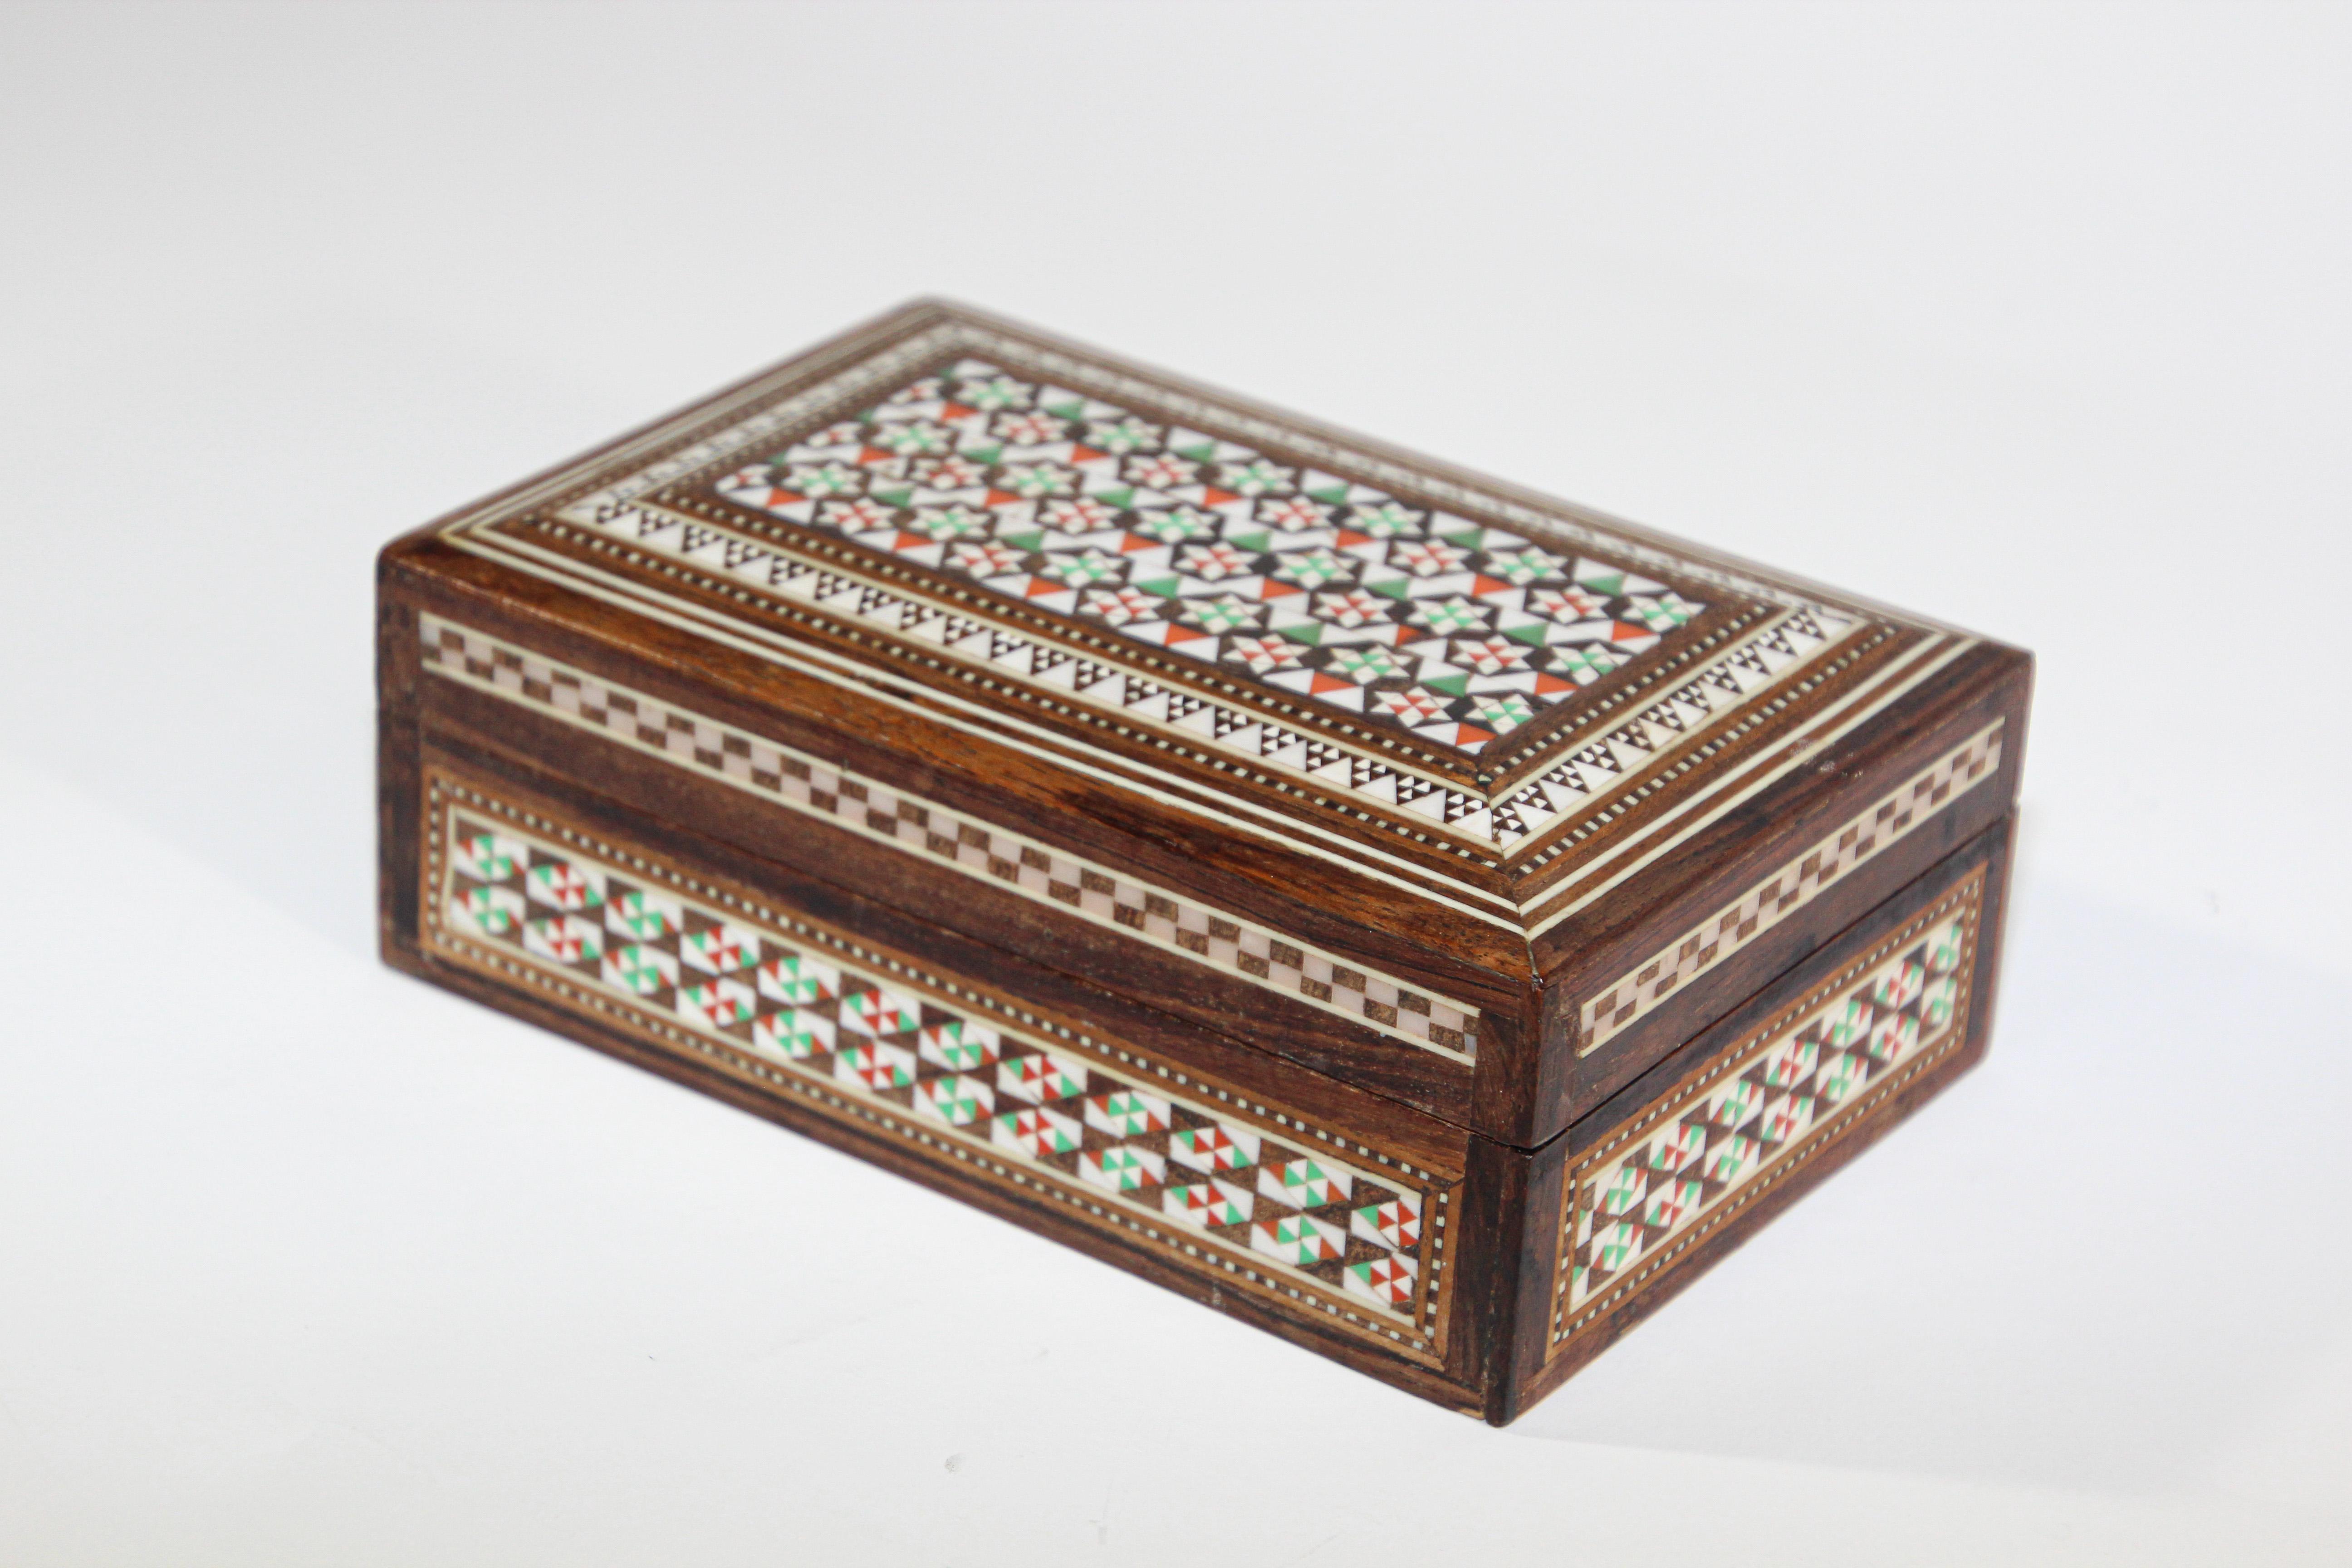 Handcrafted marquetry Moorish wood inlay micro mosaic with miniature hand painted scene.
Handcrafted khatam wooden box with very delicate micro mosaic marquetry from the ancient Persian technique of inlaying from arrangements of so many delicate